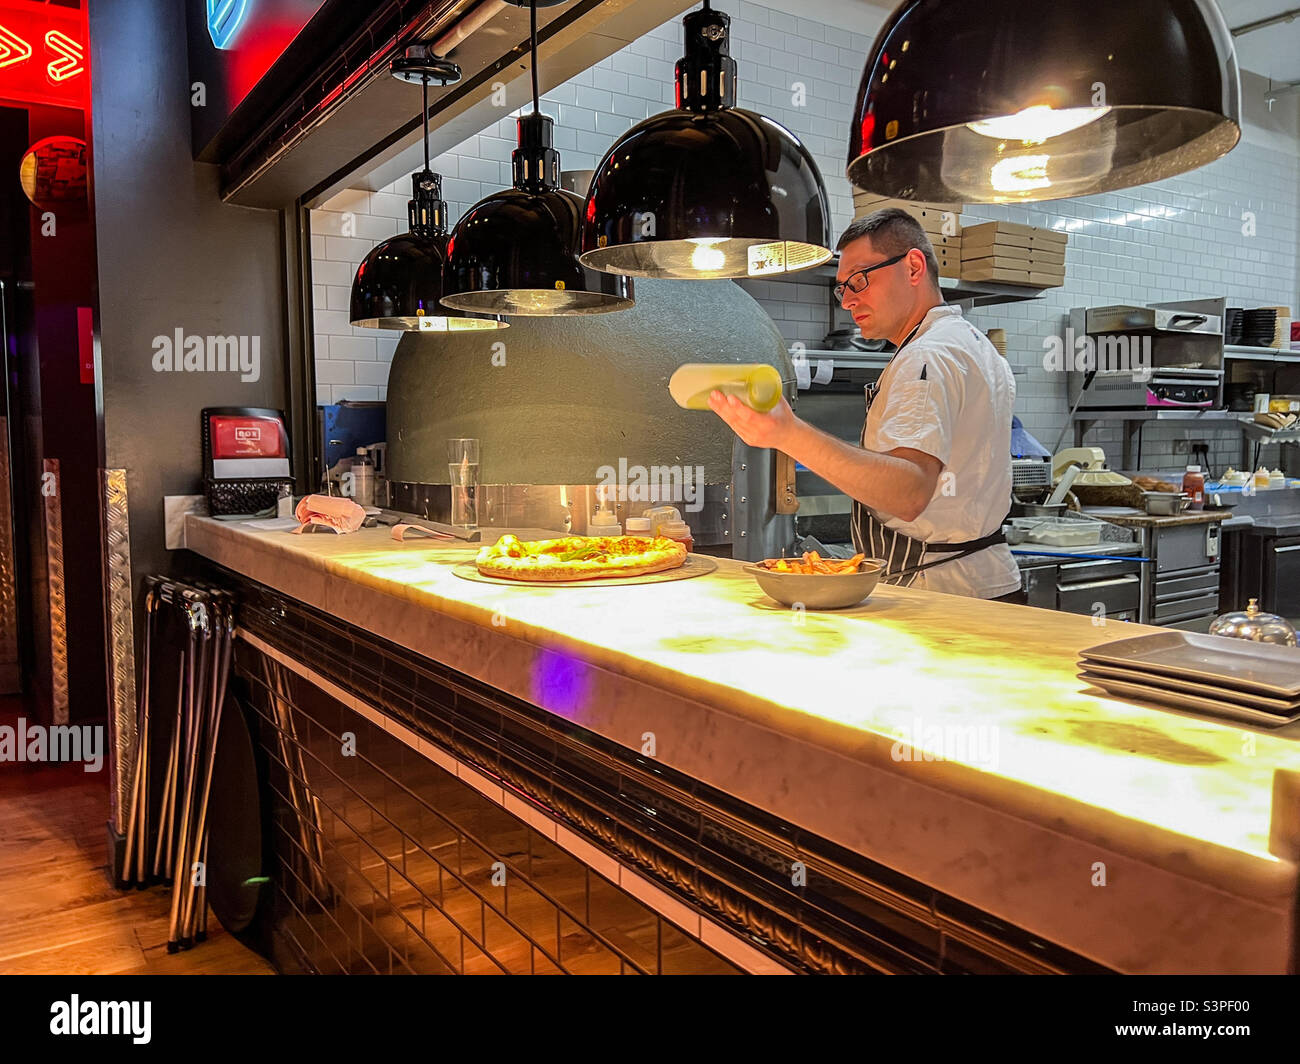 Chef putting finishing touches onto a pizza at a bar restaurant Stock Photo